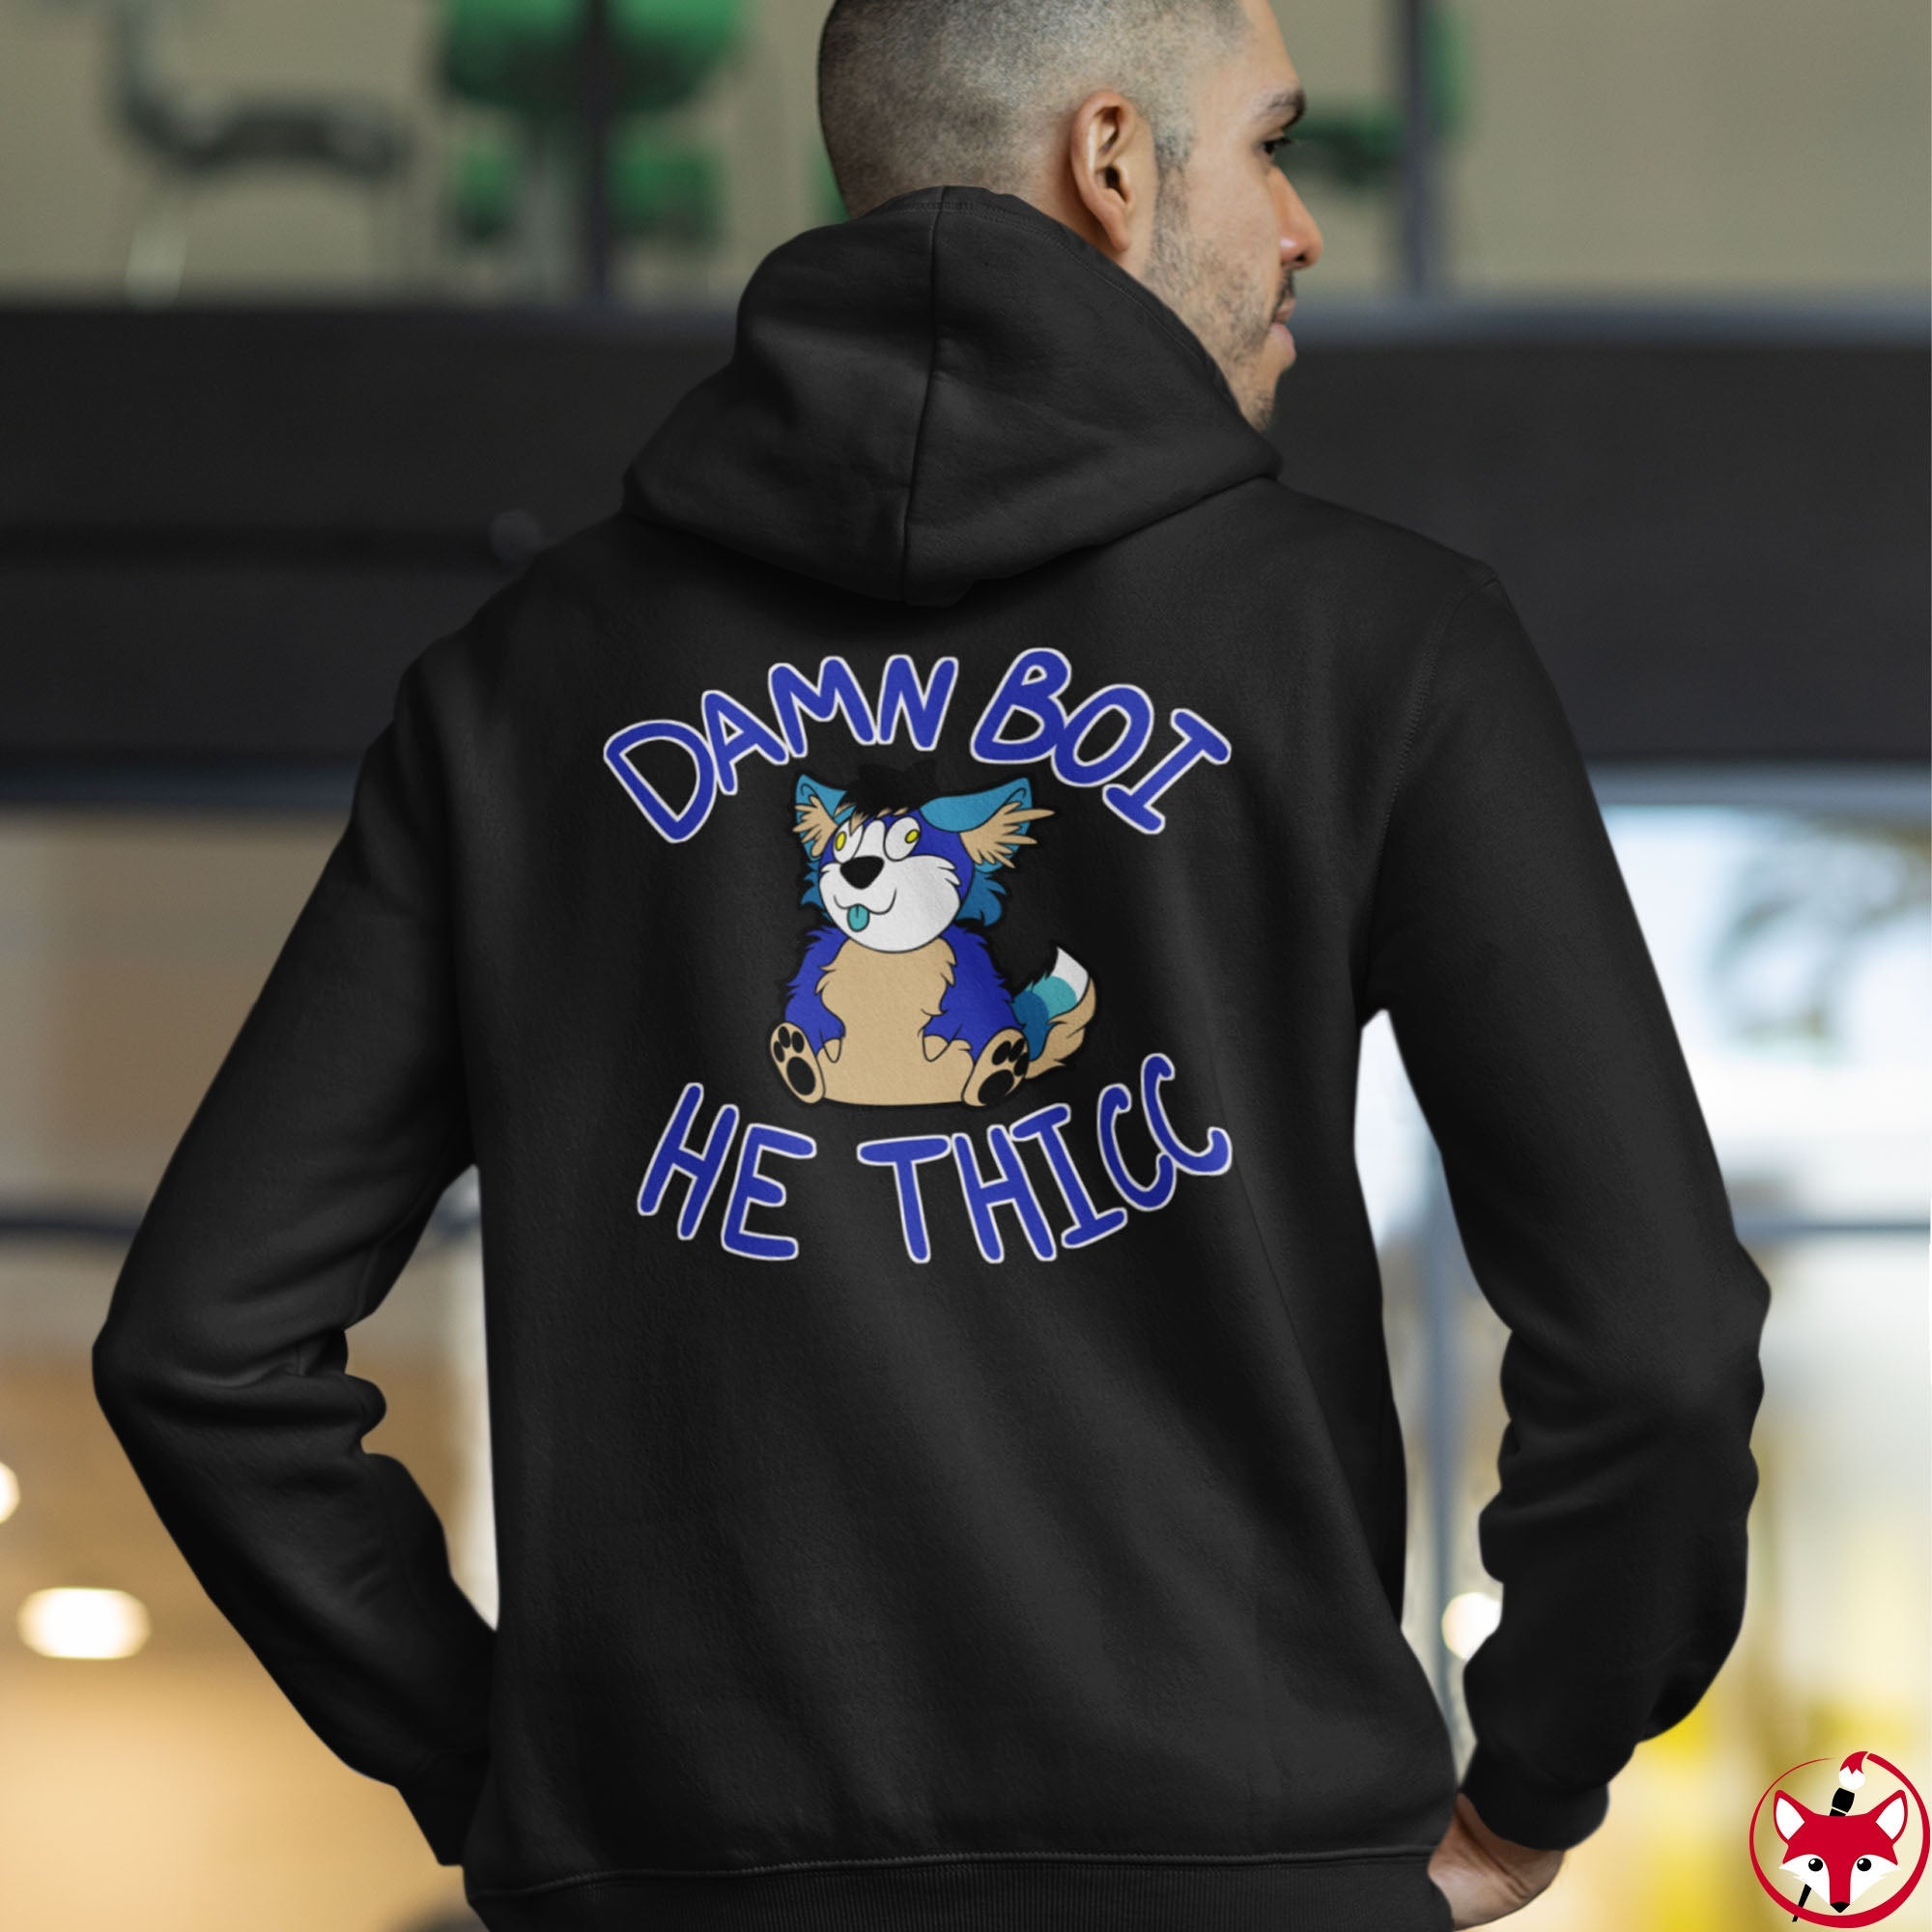 Thicc Boi With Text - Hoodie Hoodie AFLT-Hund The Hound 